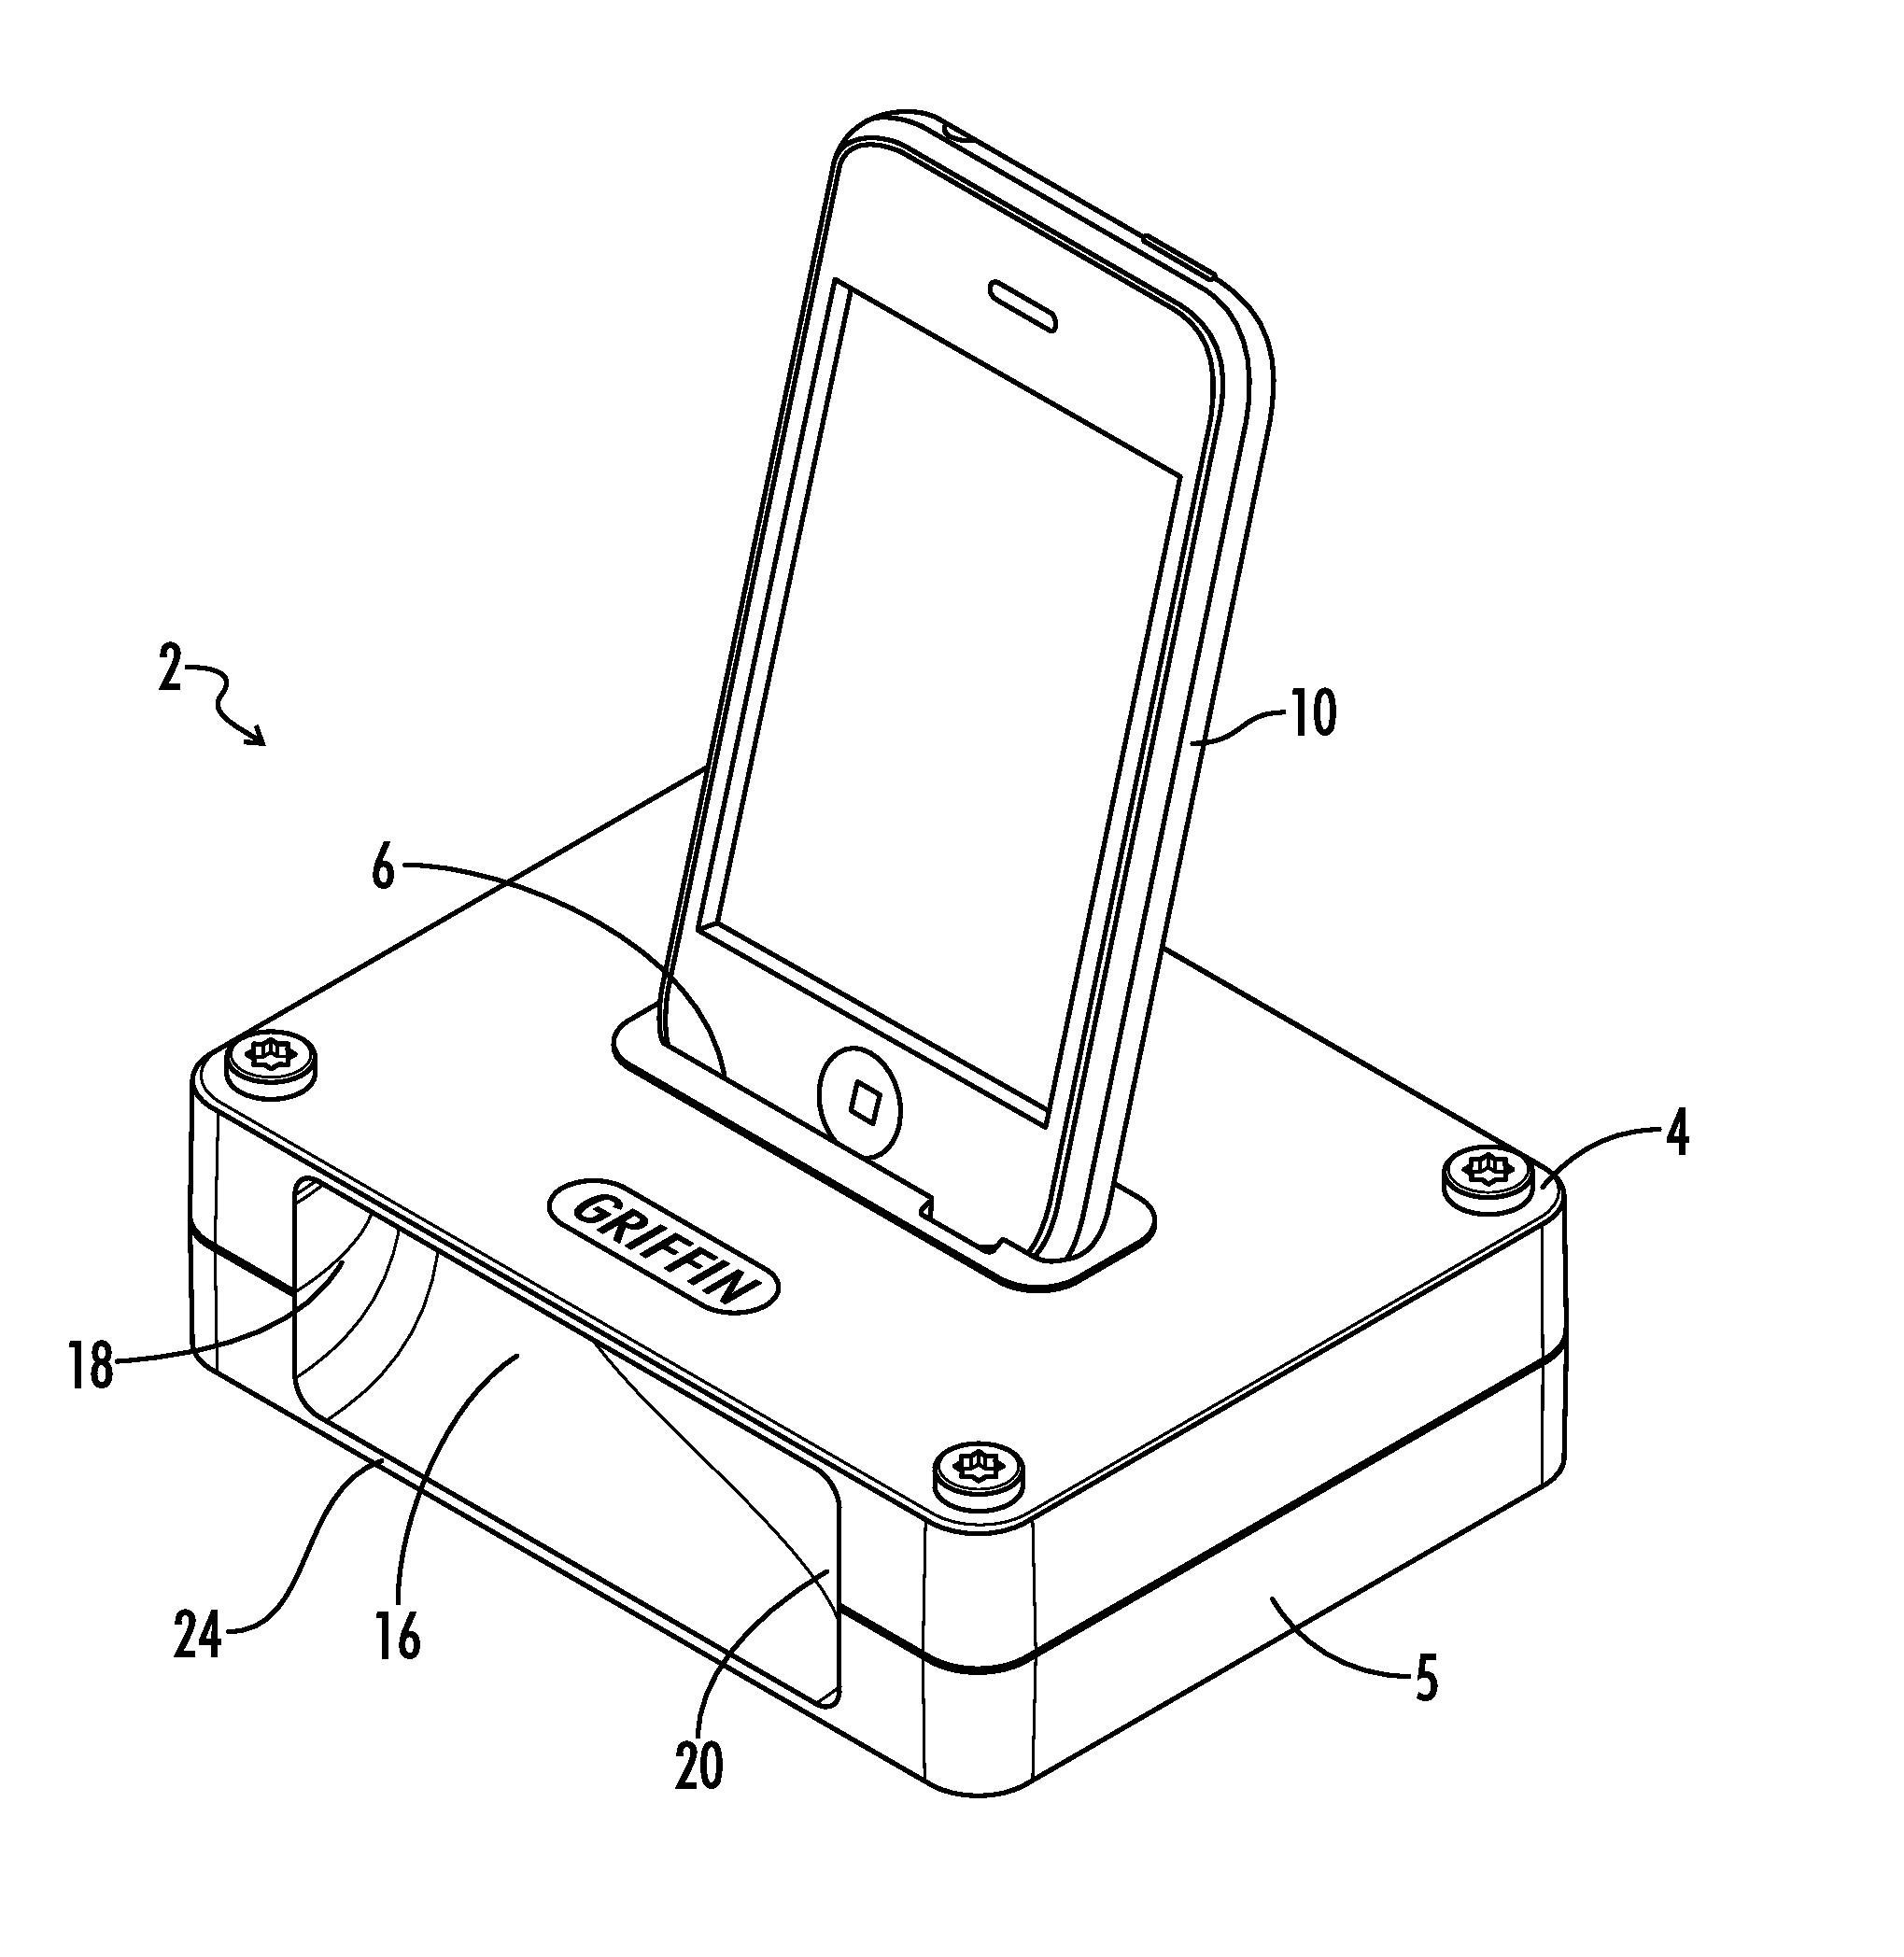 Acoustic dock for portable electronic device